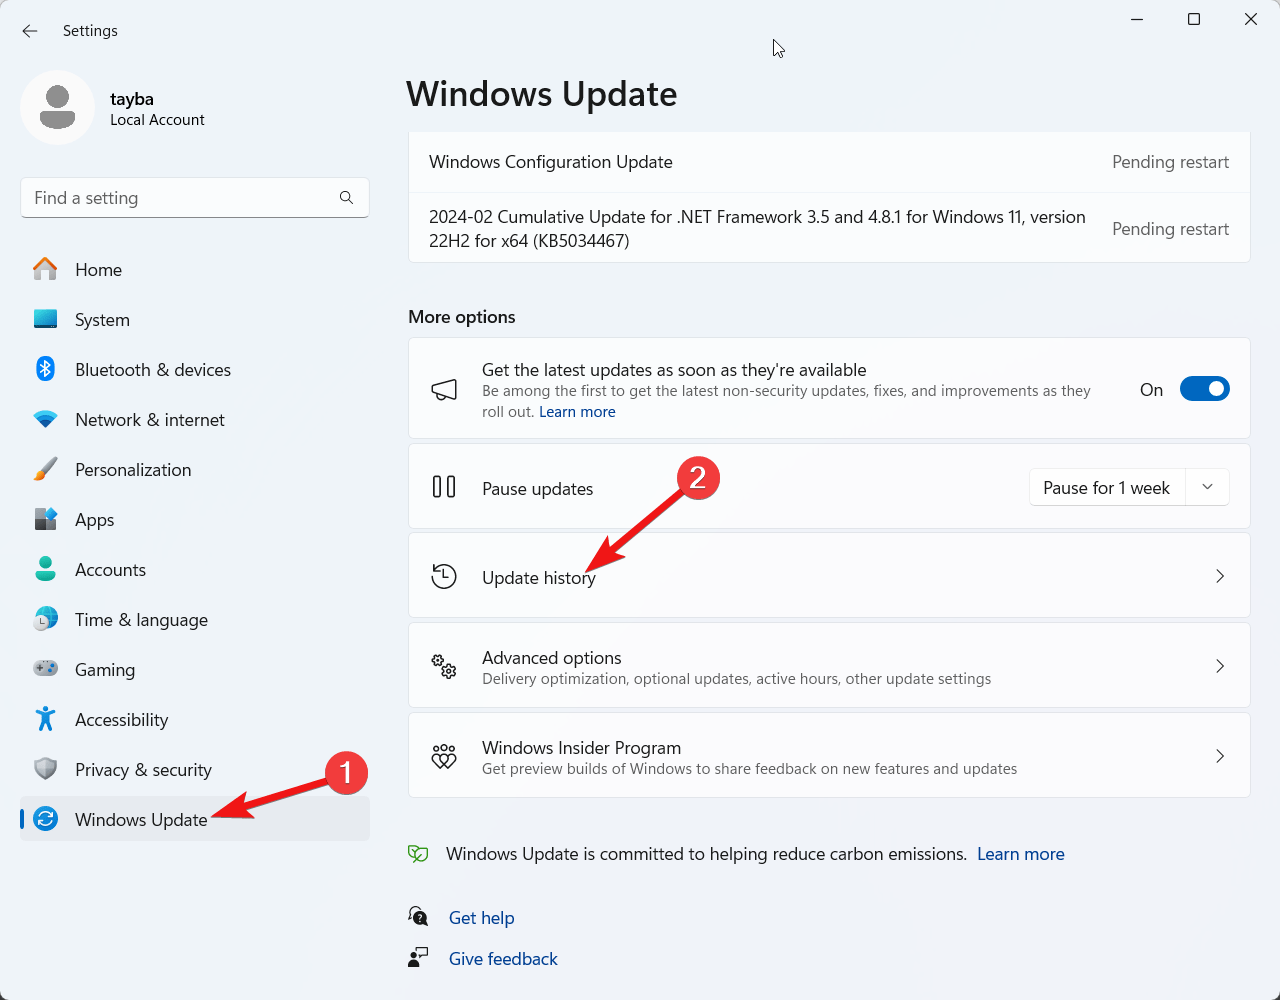 Choose Update history from the right section